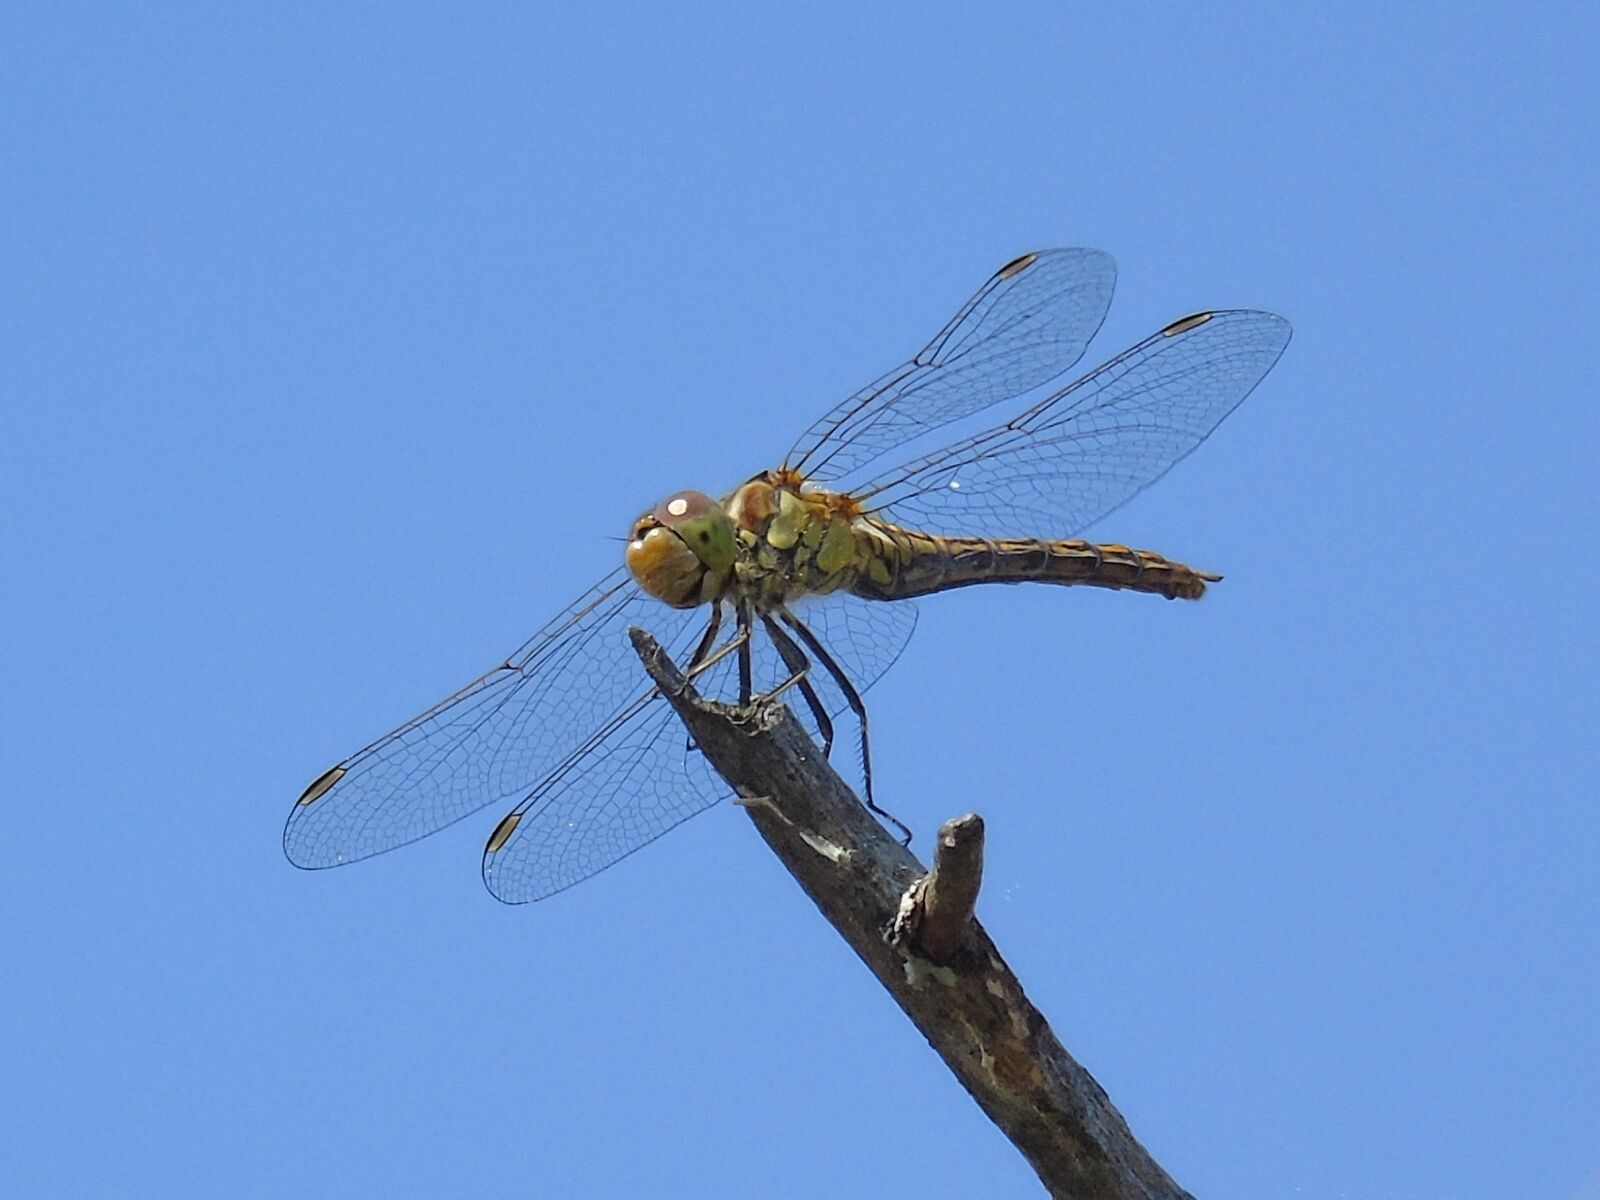 Sony Cyber-shot DSC-H400 sample photo. Animal, insect, dragonfly photography